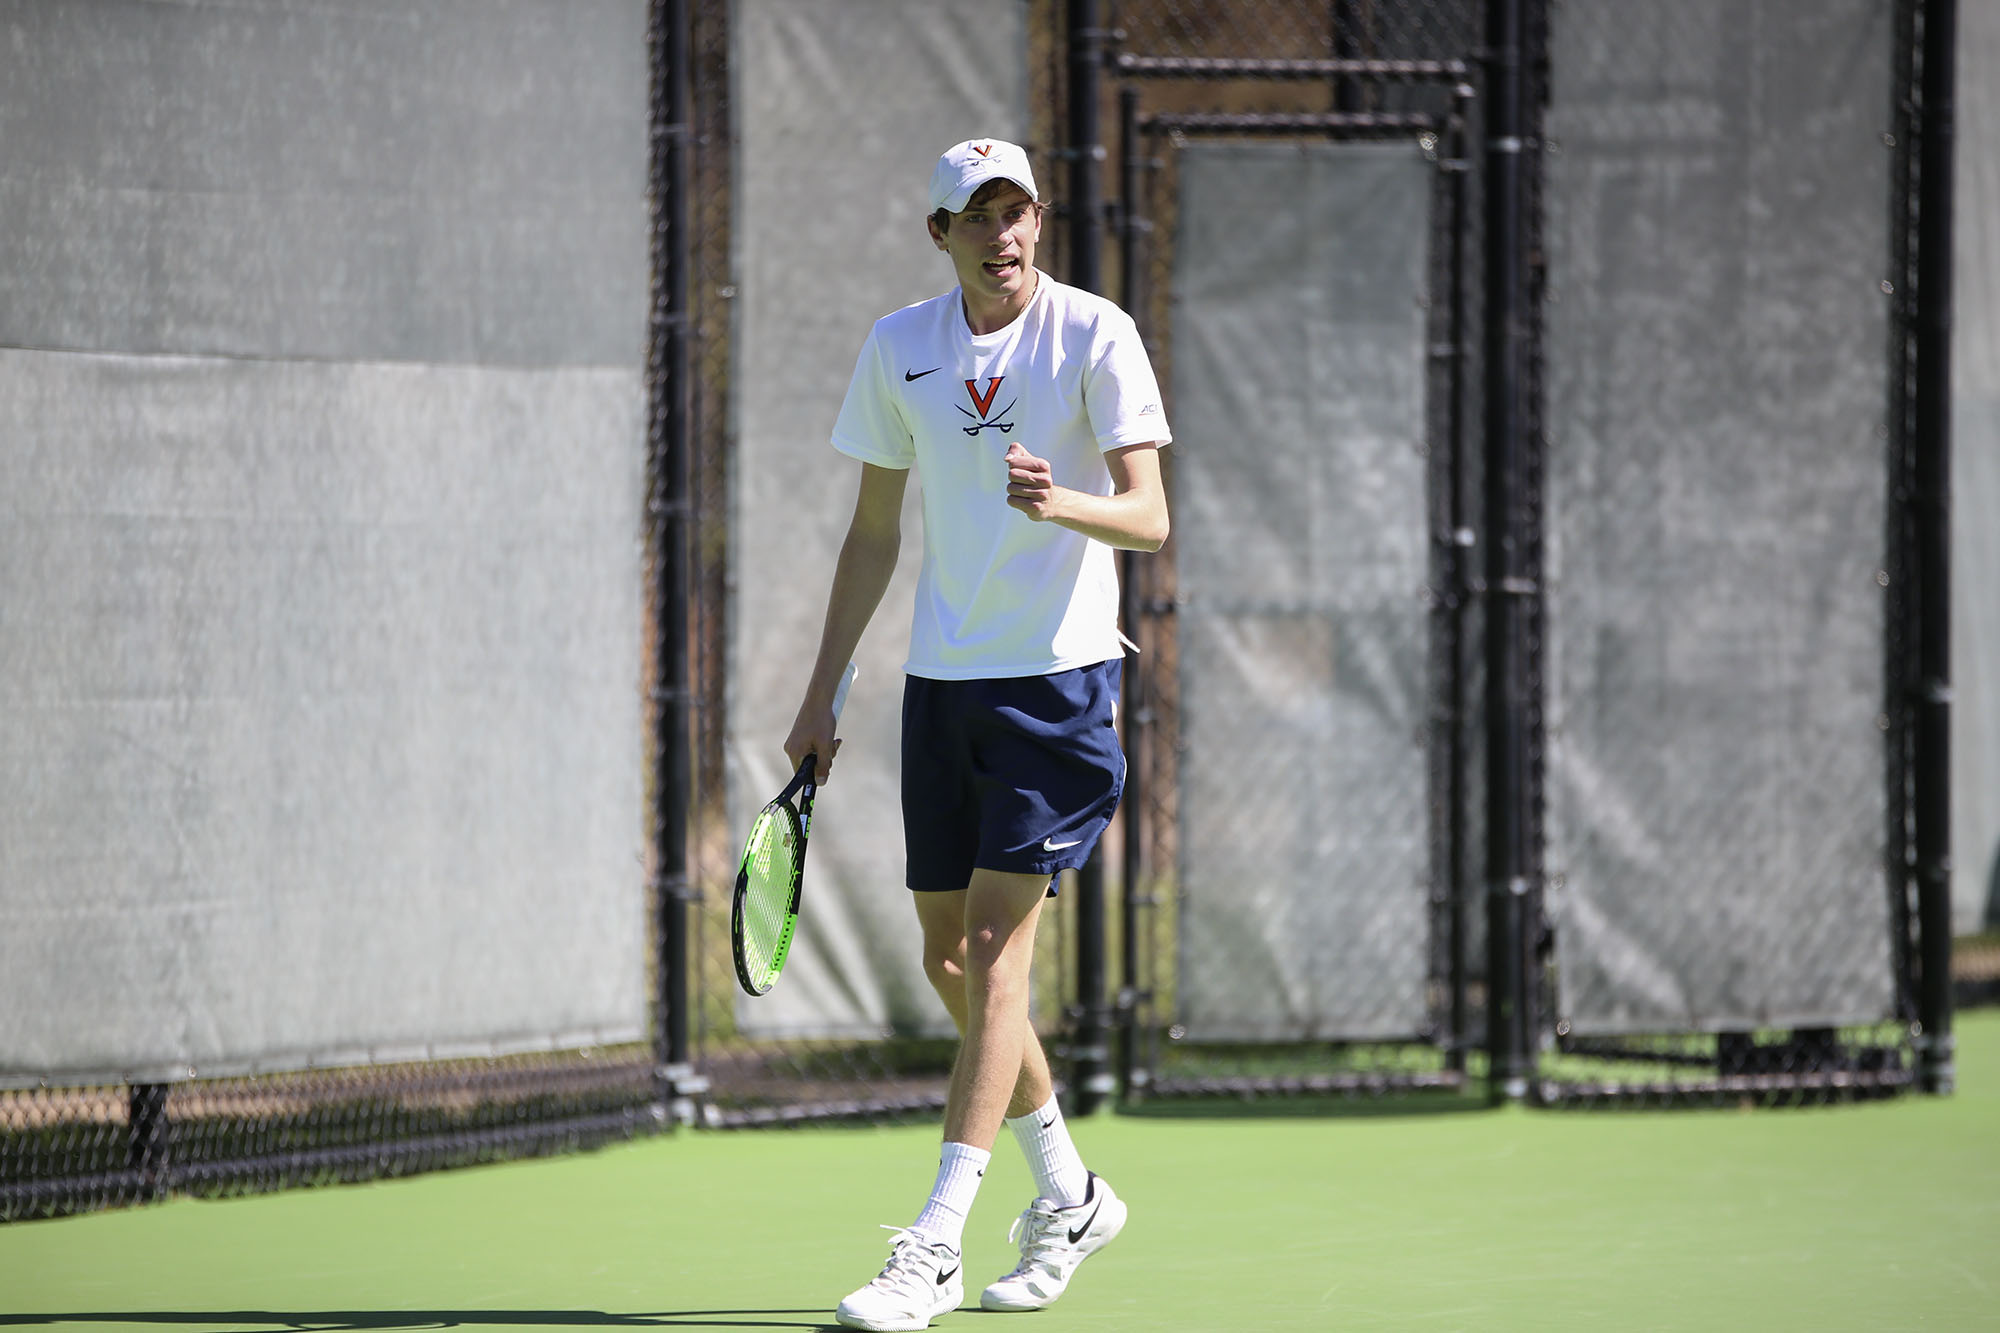 Spencer Bozsik carrying a tennis racquet on the court while talking